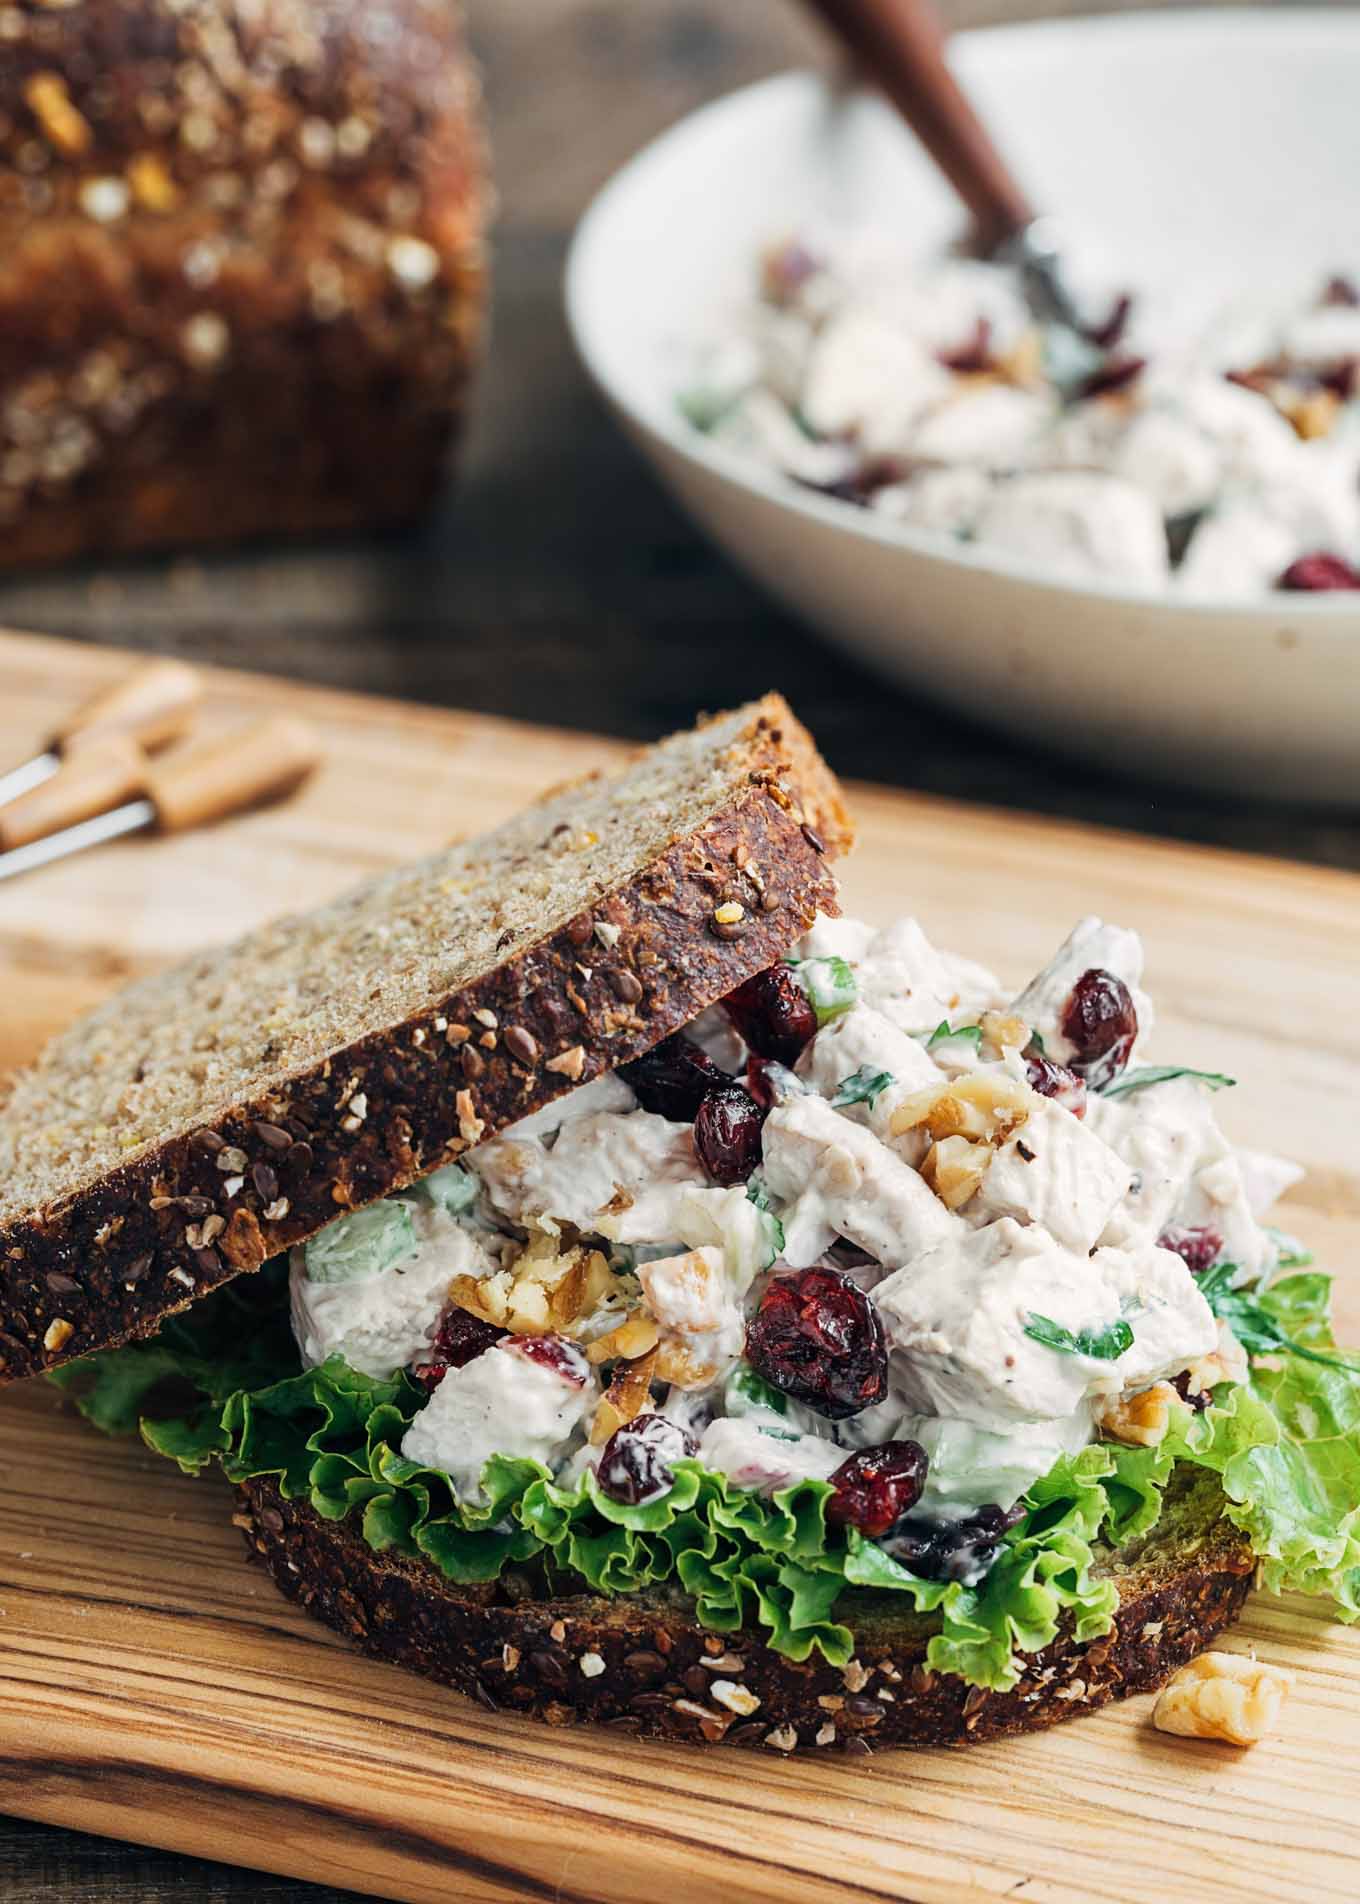 Cranberry Chicken Salad with Walnuts on whole grain bread